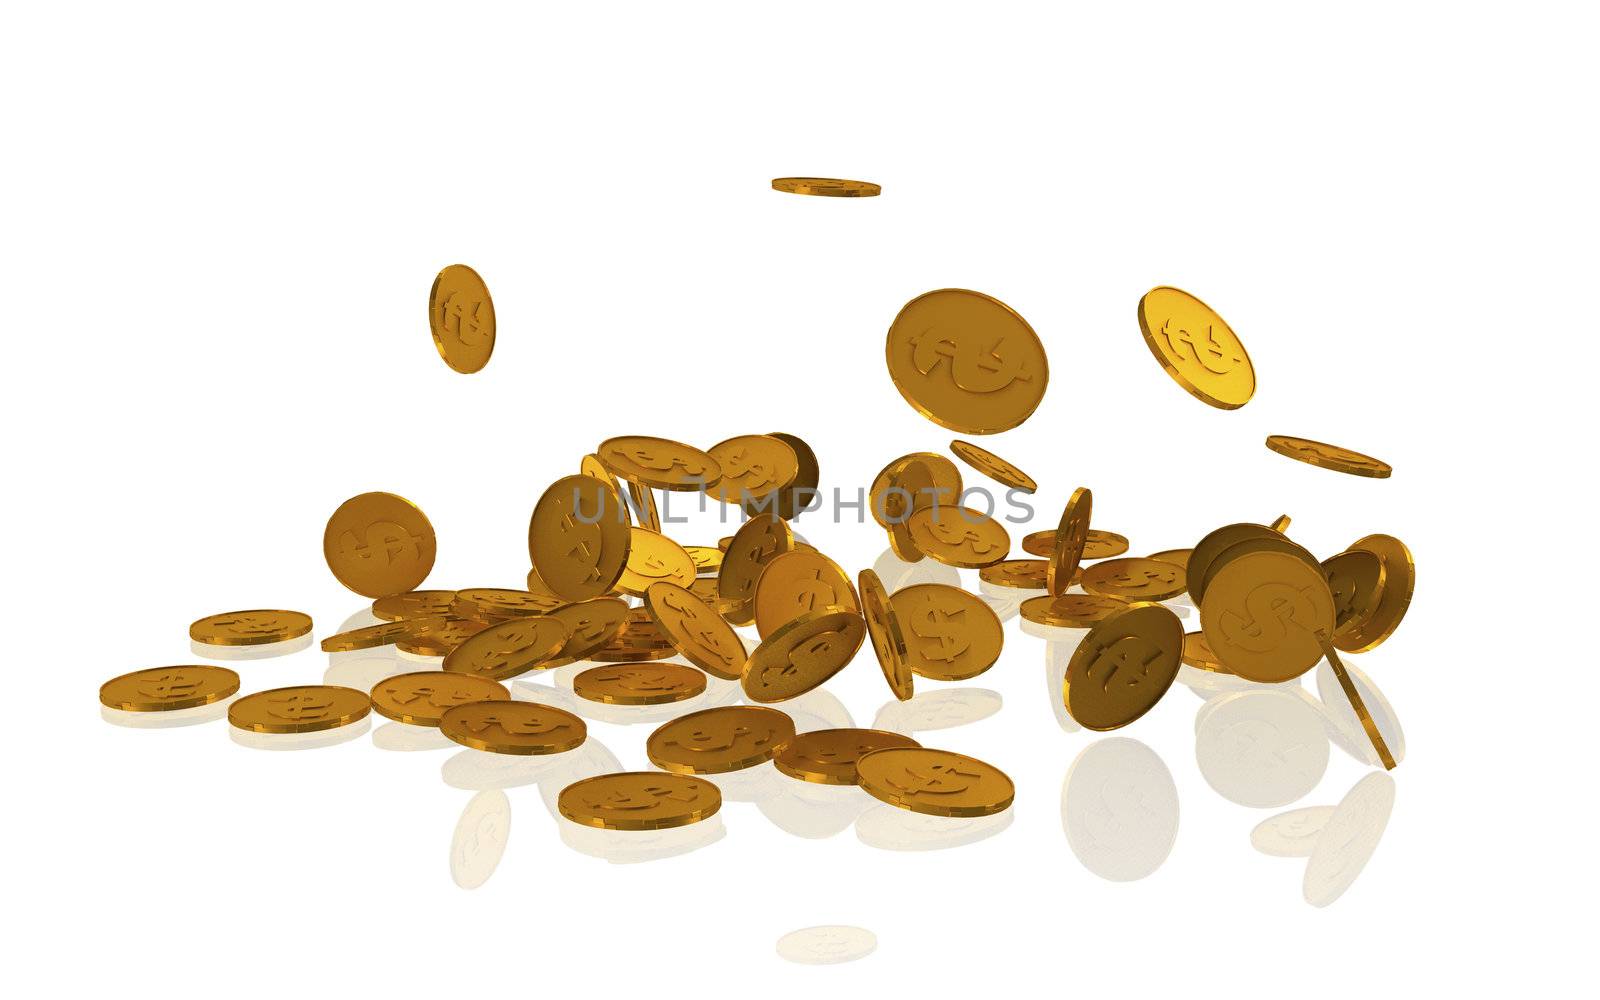 Golden coins by magraphics